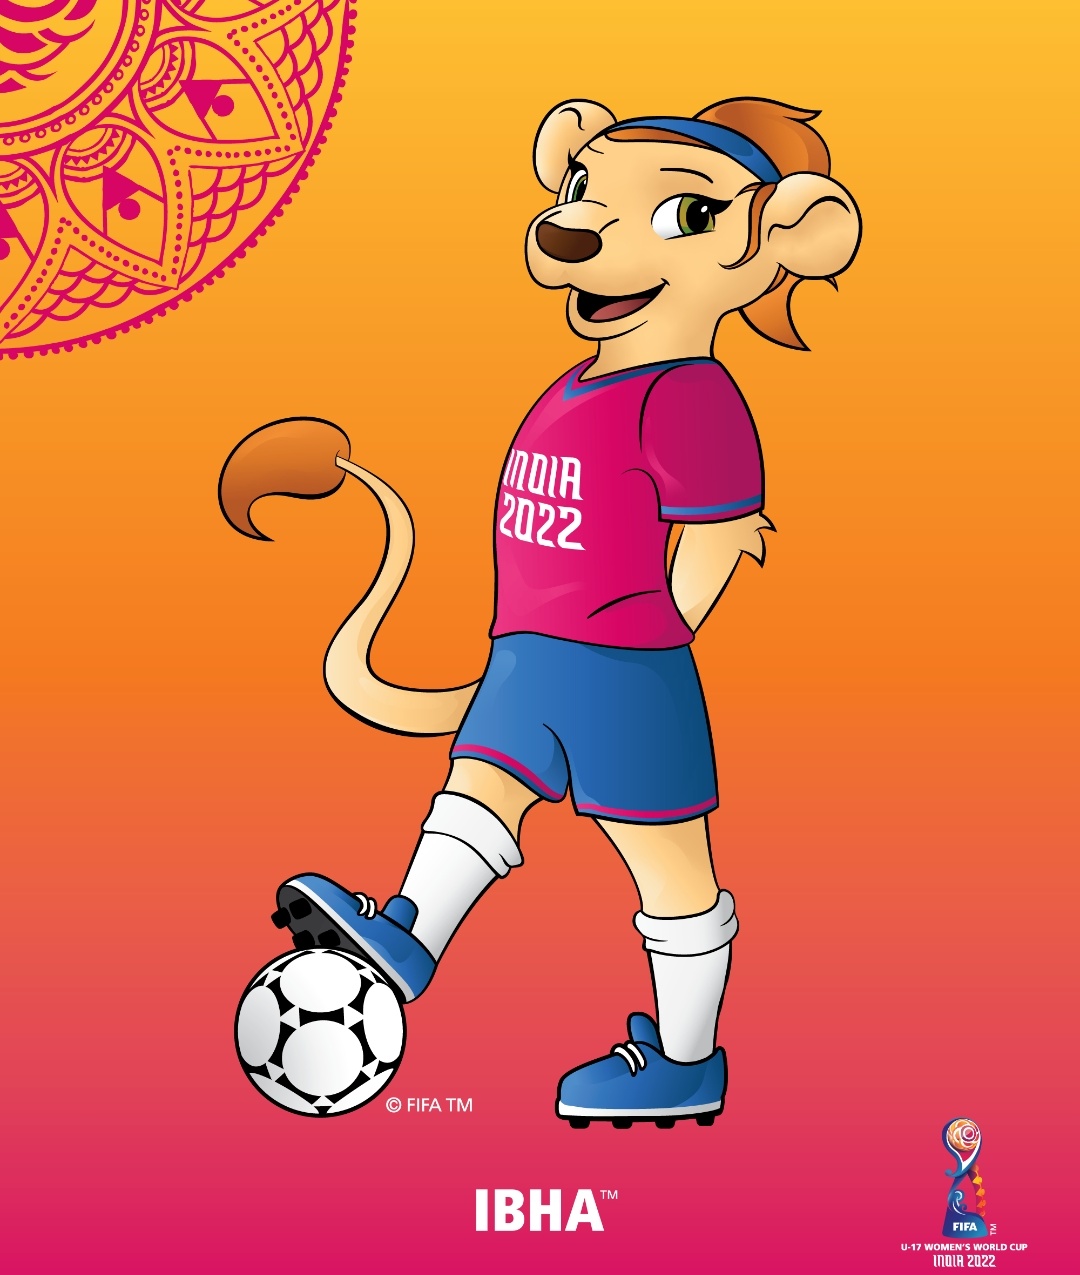 Official Mascot revealed for FIFA U17 Women's World Cup India 2022